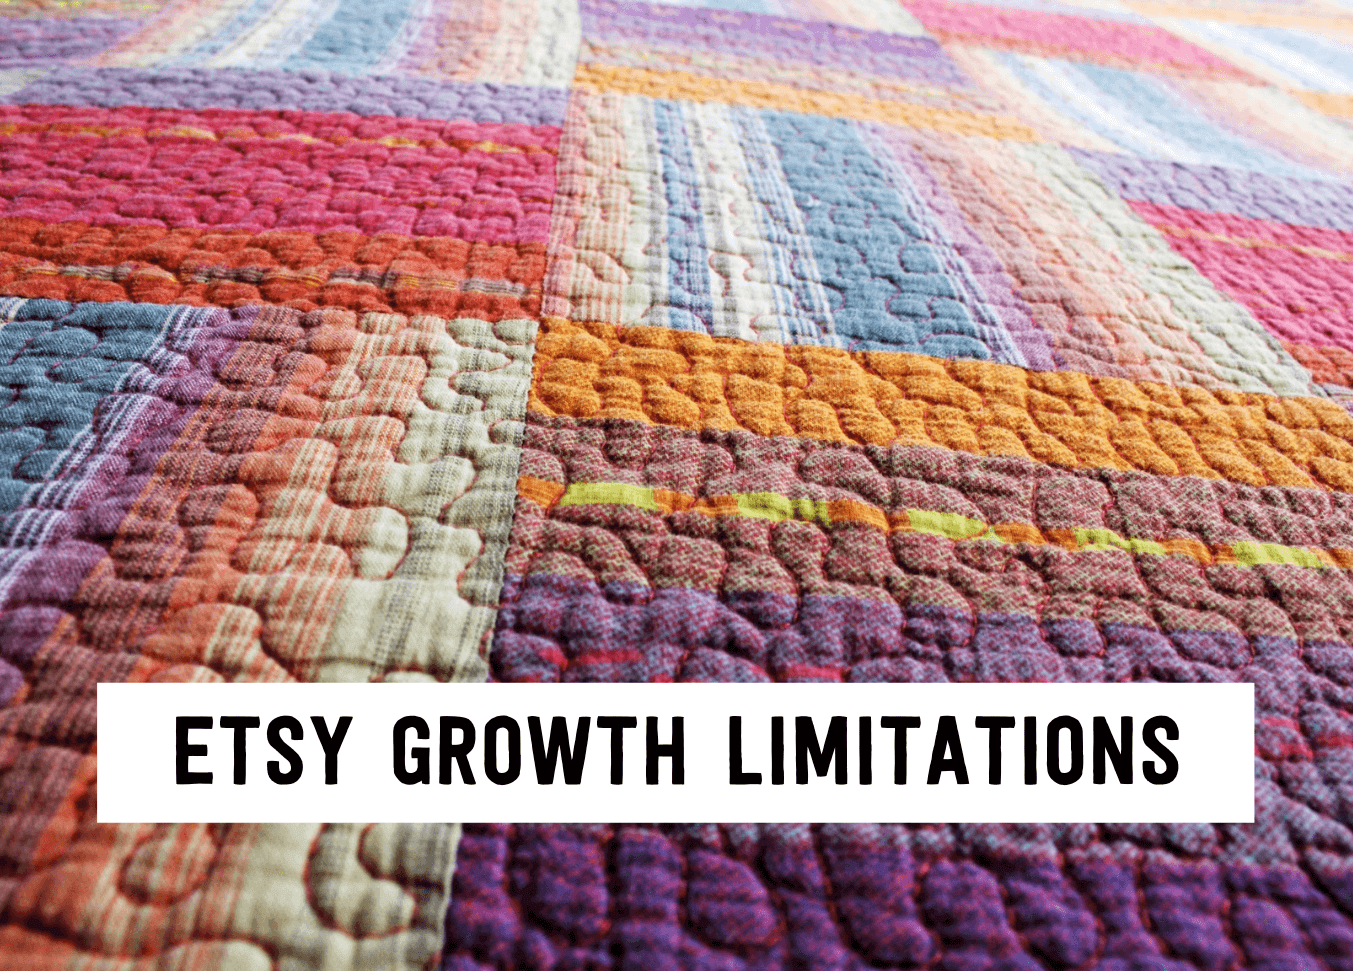 Etsy Growth Limitations | Tizzit.co - start and grow a successful handmade business